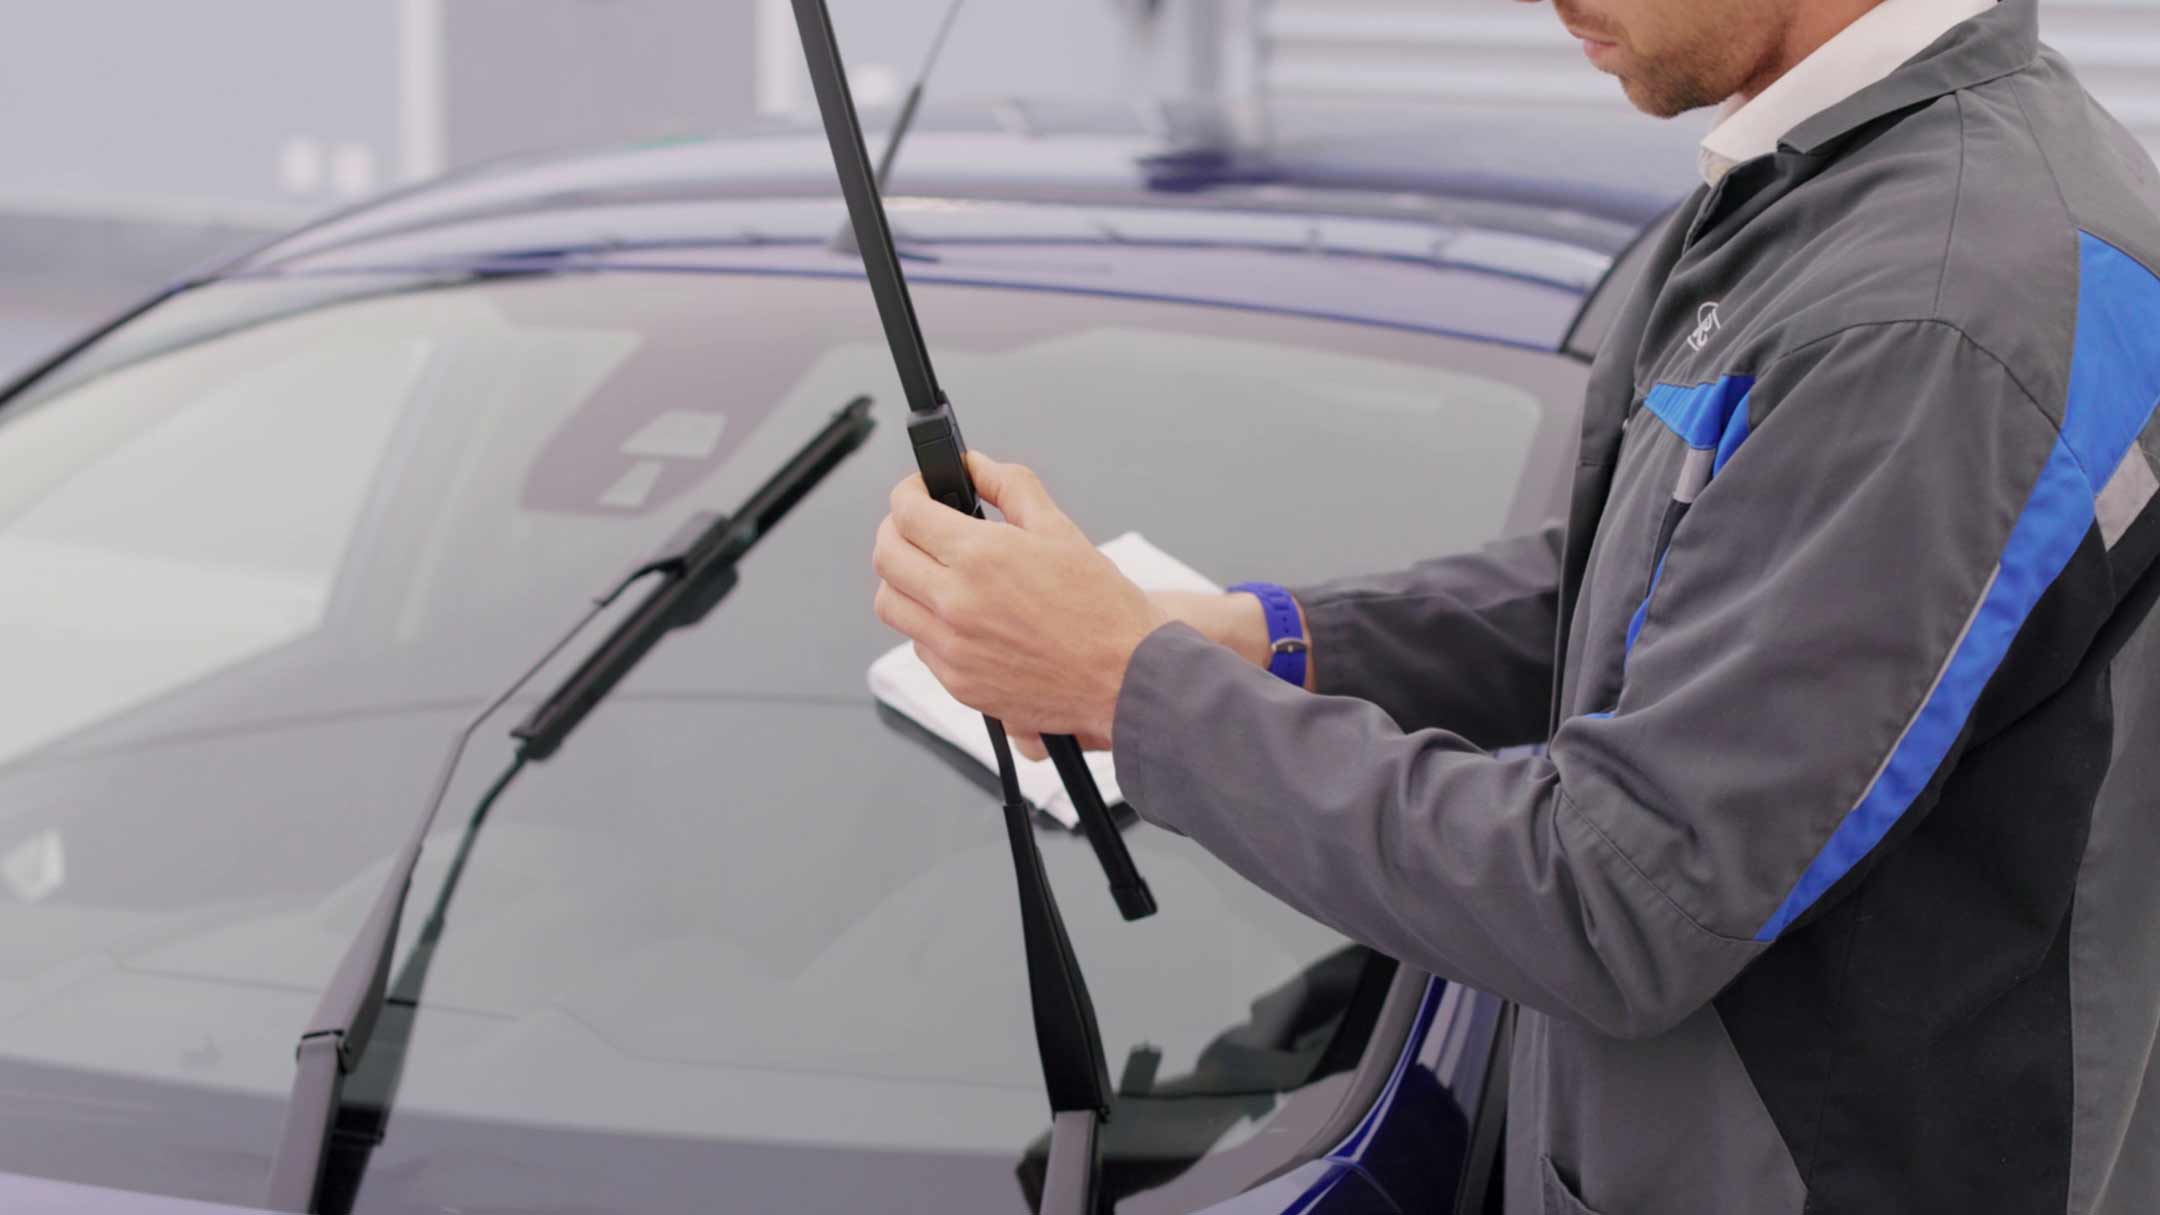 HOW TO CHECK AND REPLACE YOUR WIPER BLADES